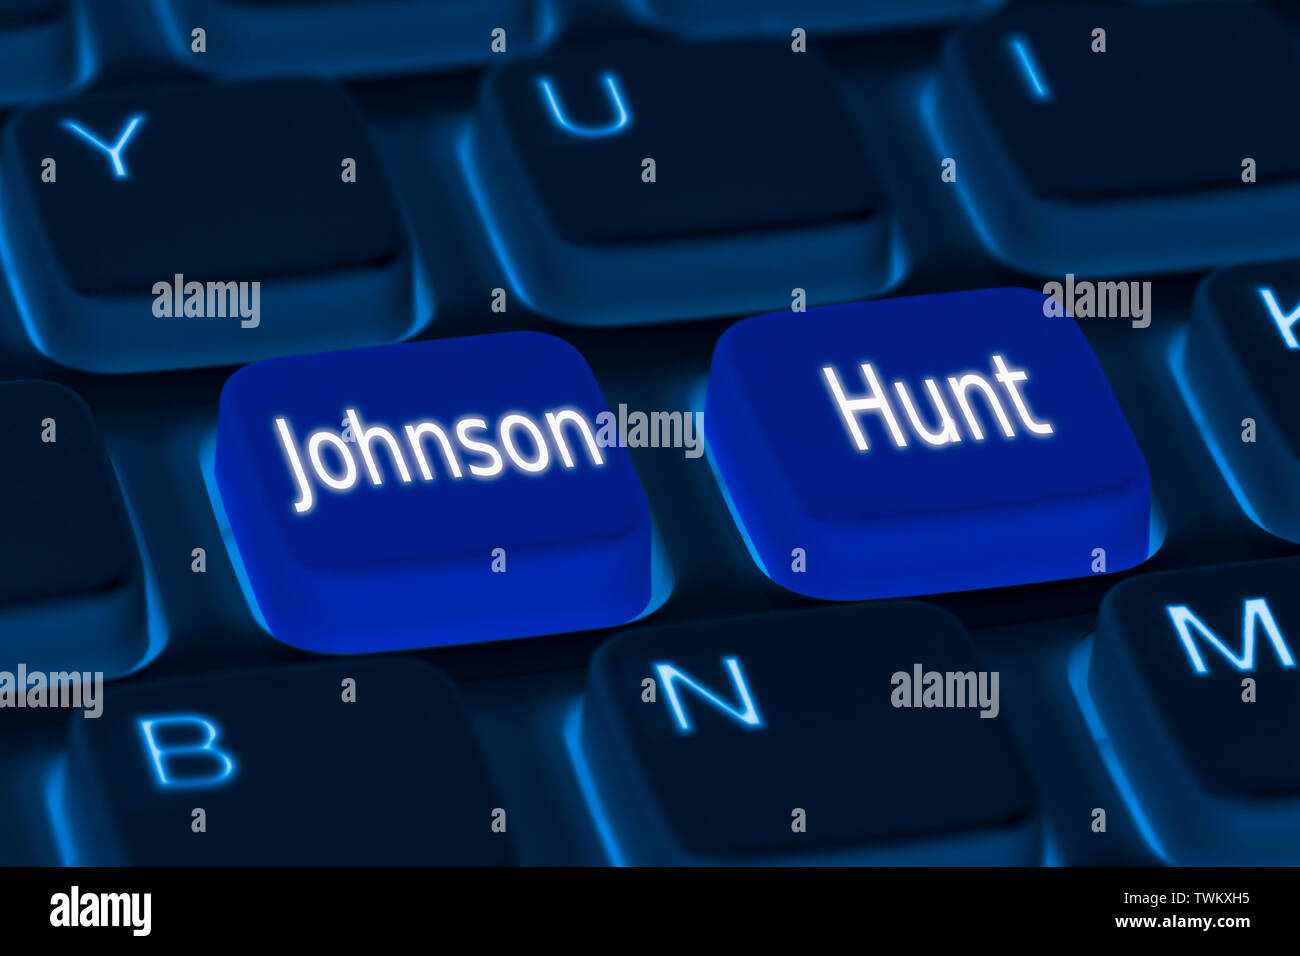 Keyboard with buttons to vote either Boris Johnson or Jeremy Hunt to become the next Conservative Leader & Prime Minister of the UK. British PM voting Stock Photo